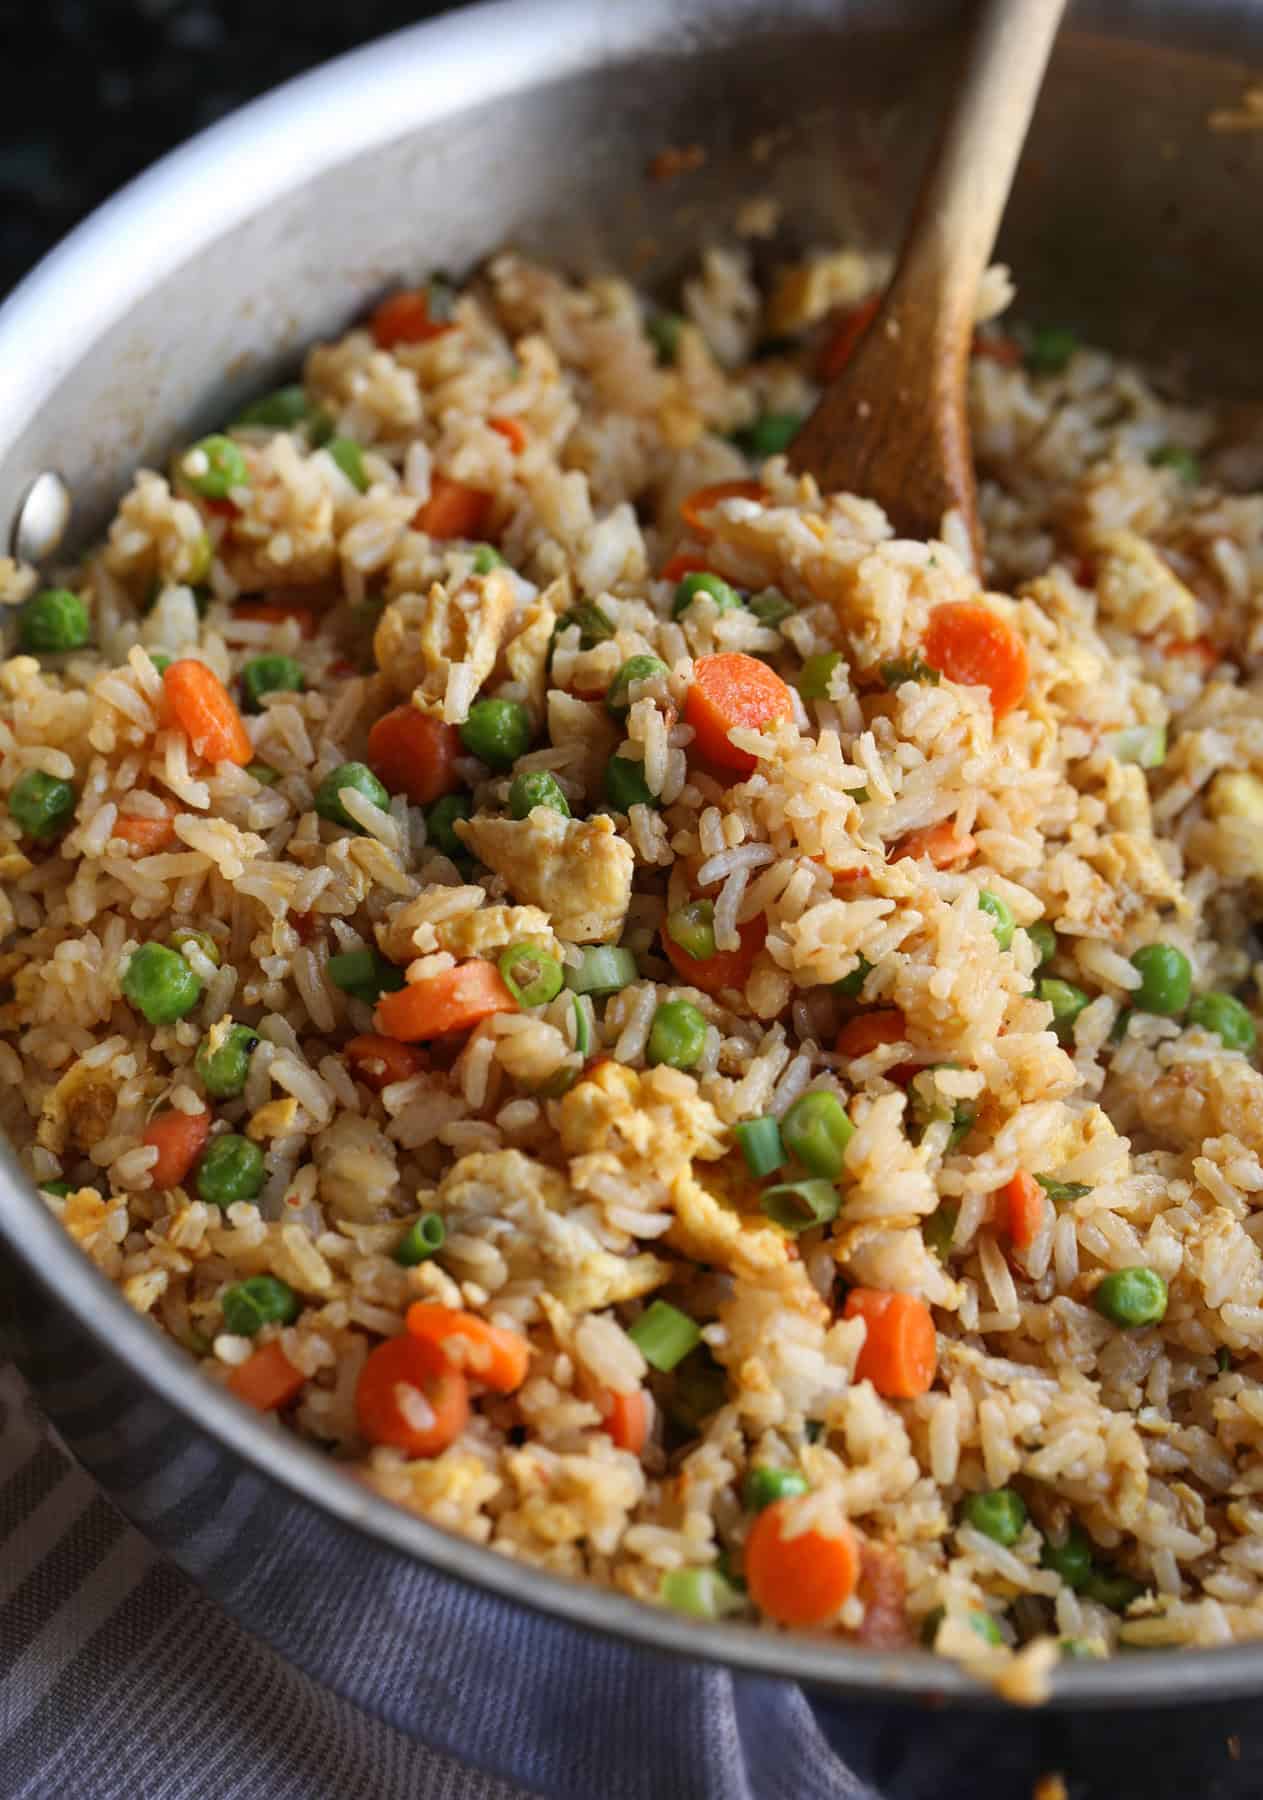 This Easy Fried Rice can be made in 20 minutes or less!